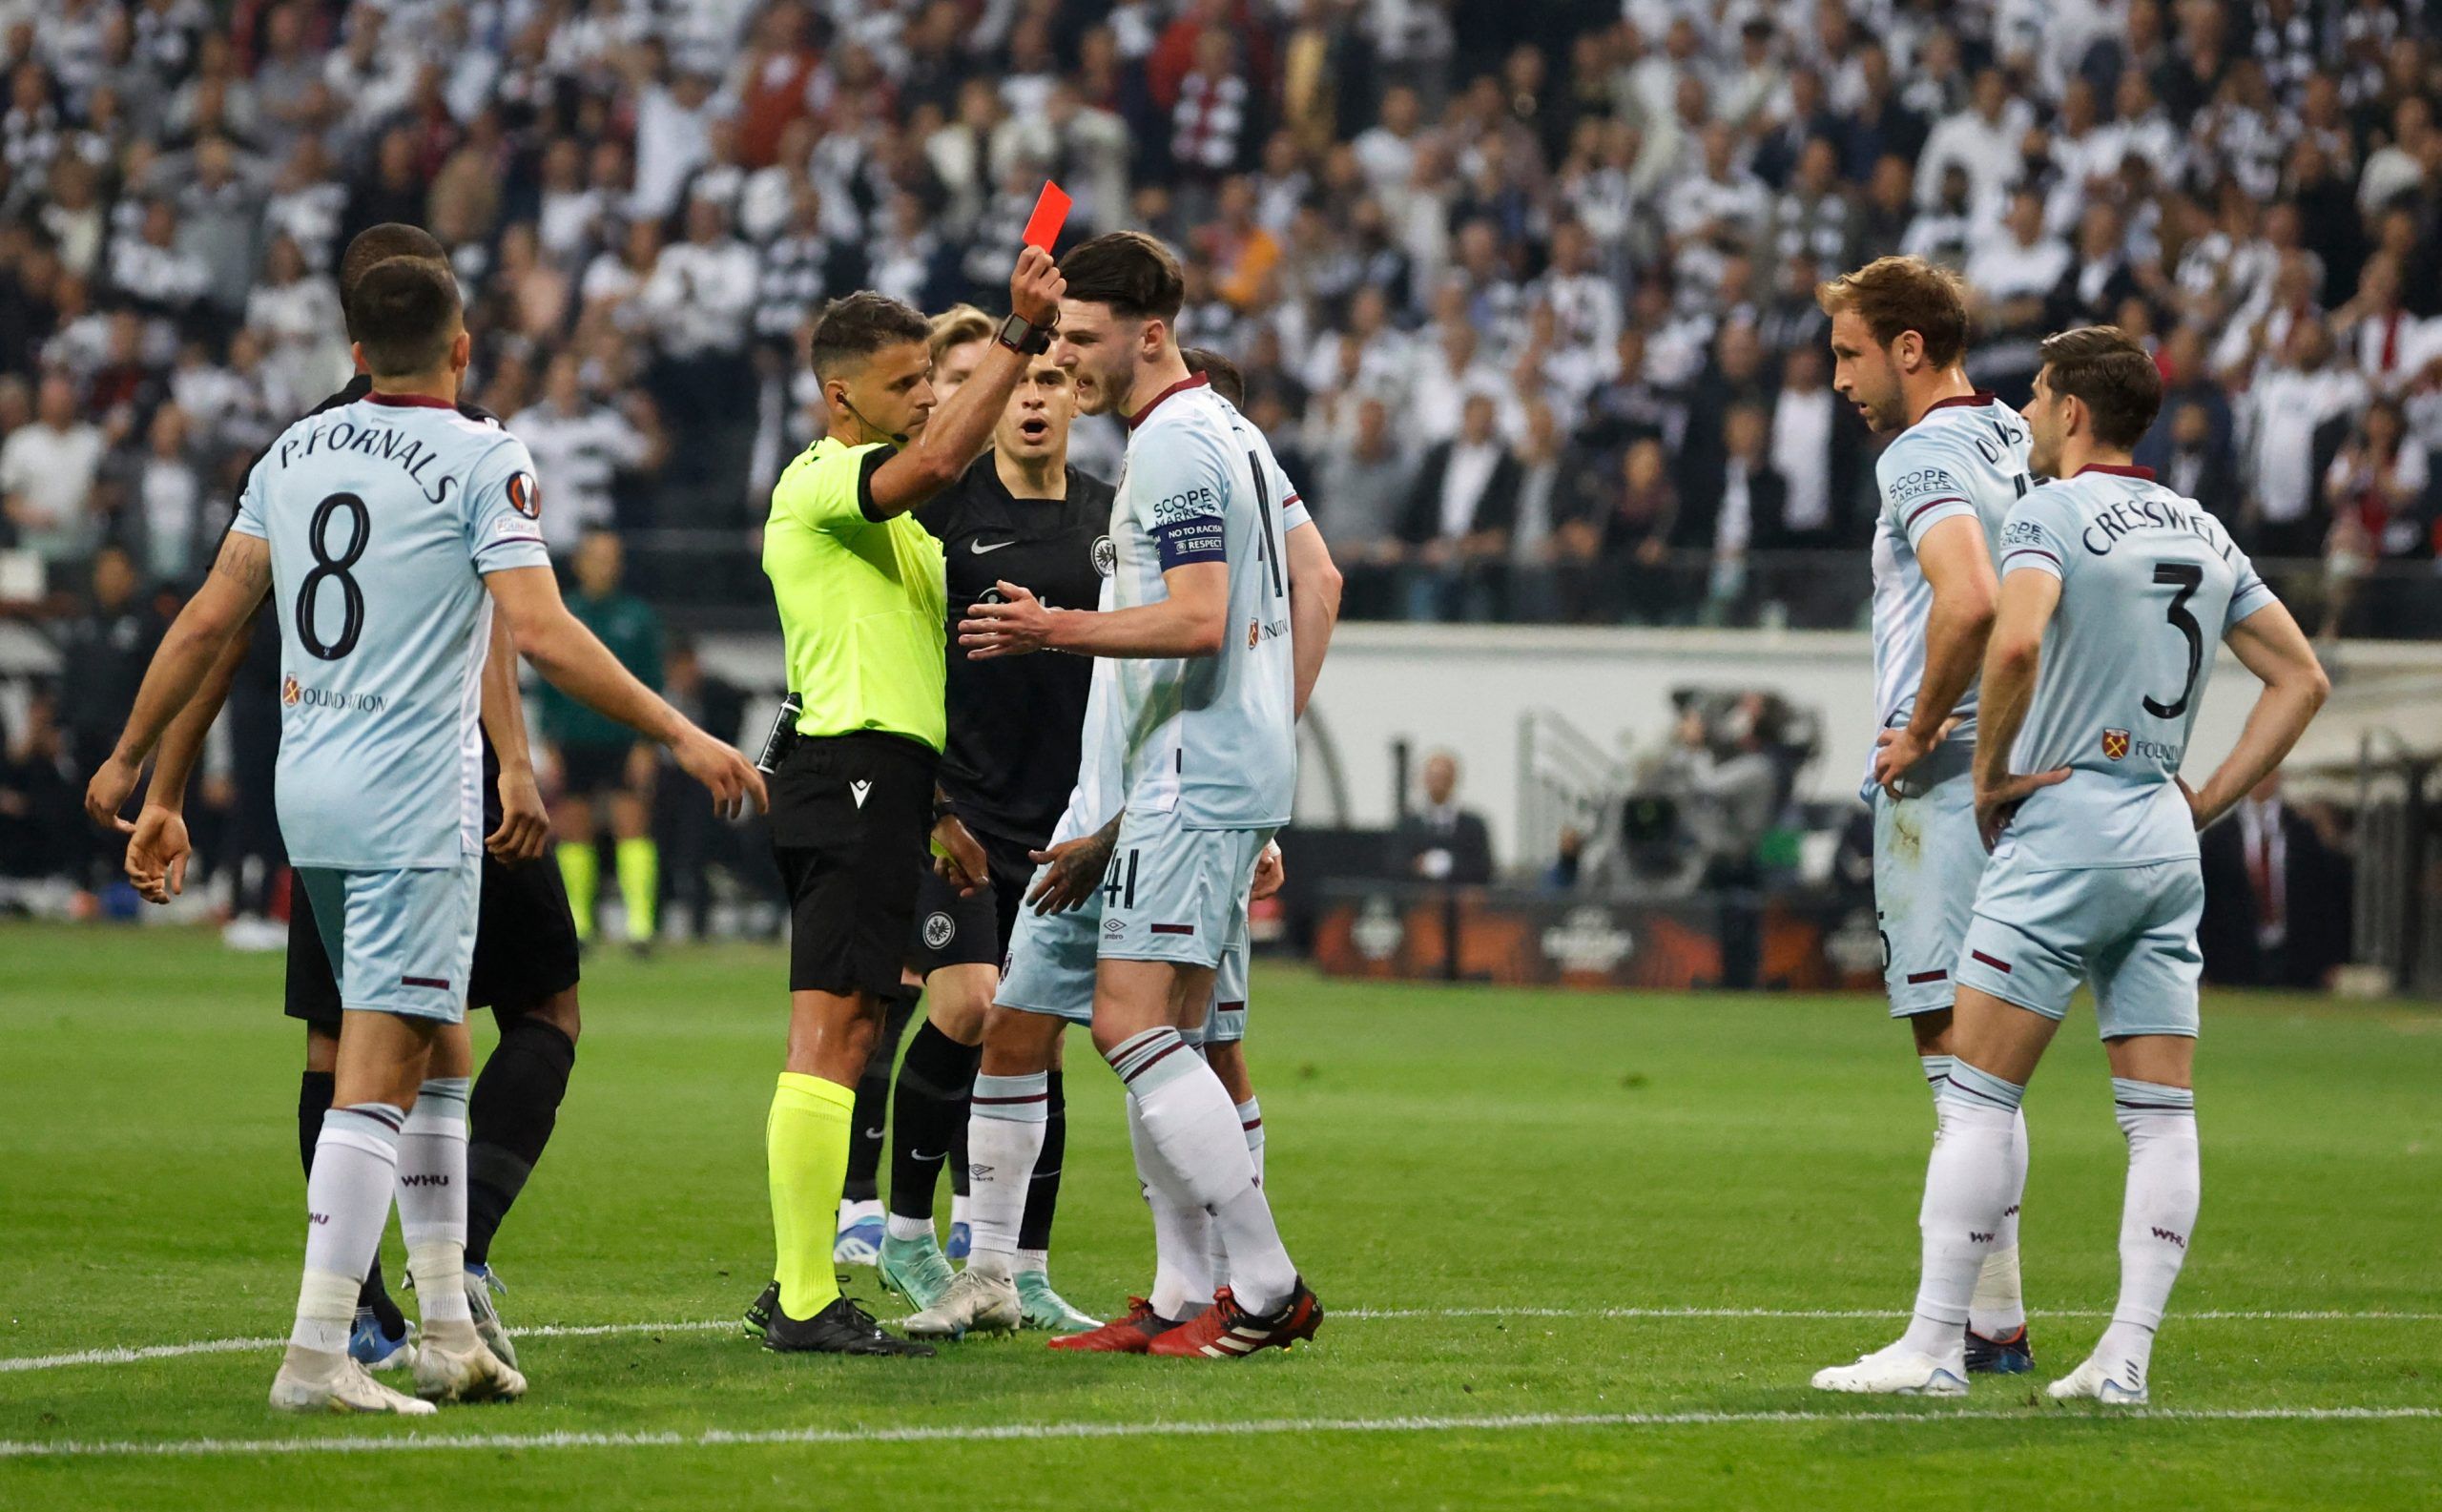 Soccer Football - Europa League - Semi Final - Second Leg - Eintracht Frankfurt v West Ham United - Deutsche Bank Park, Frankfurt, Germany - May 5, 2022 West Ham United's Aaron Cresswell is shown a red card by referee Jesus Gil Manzano after a VAR review Action Images via Reuters/Peter Cziborra